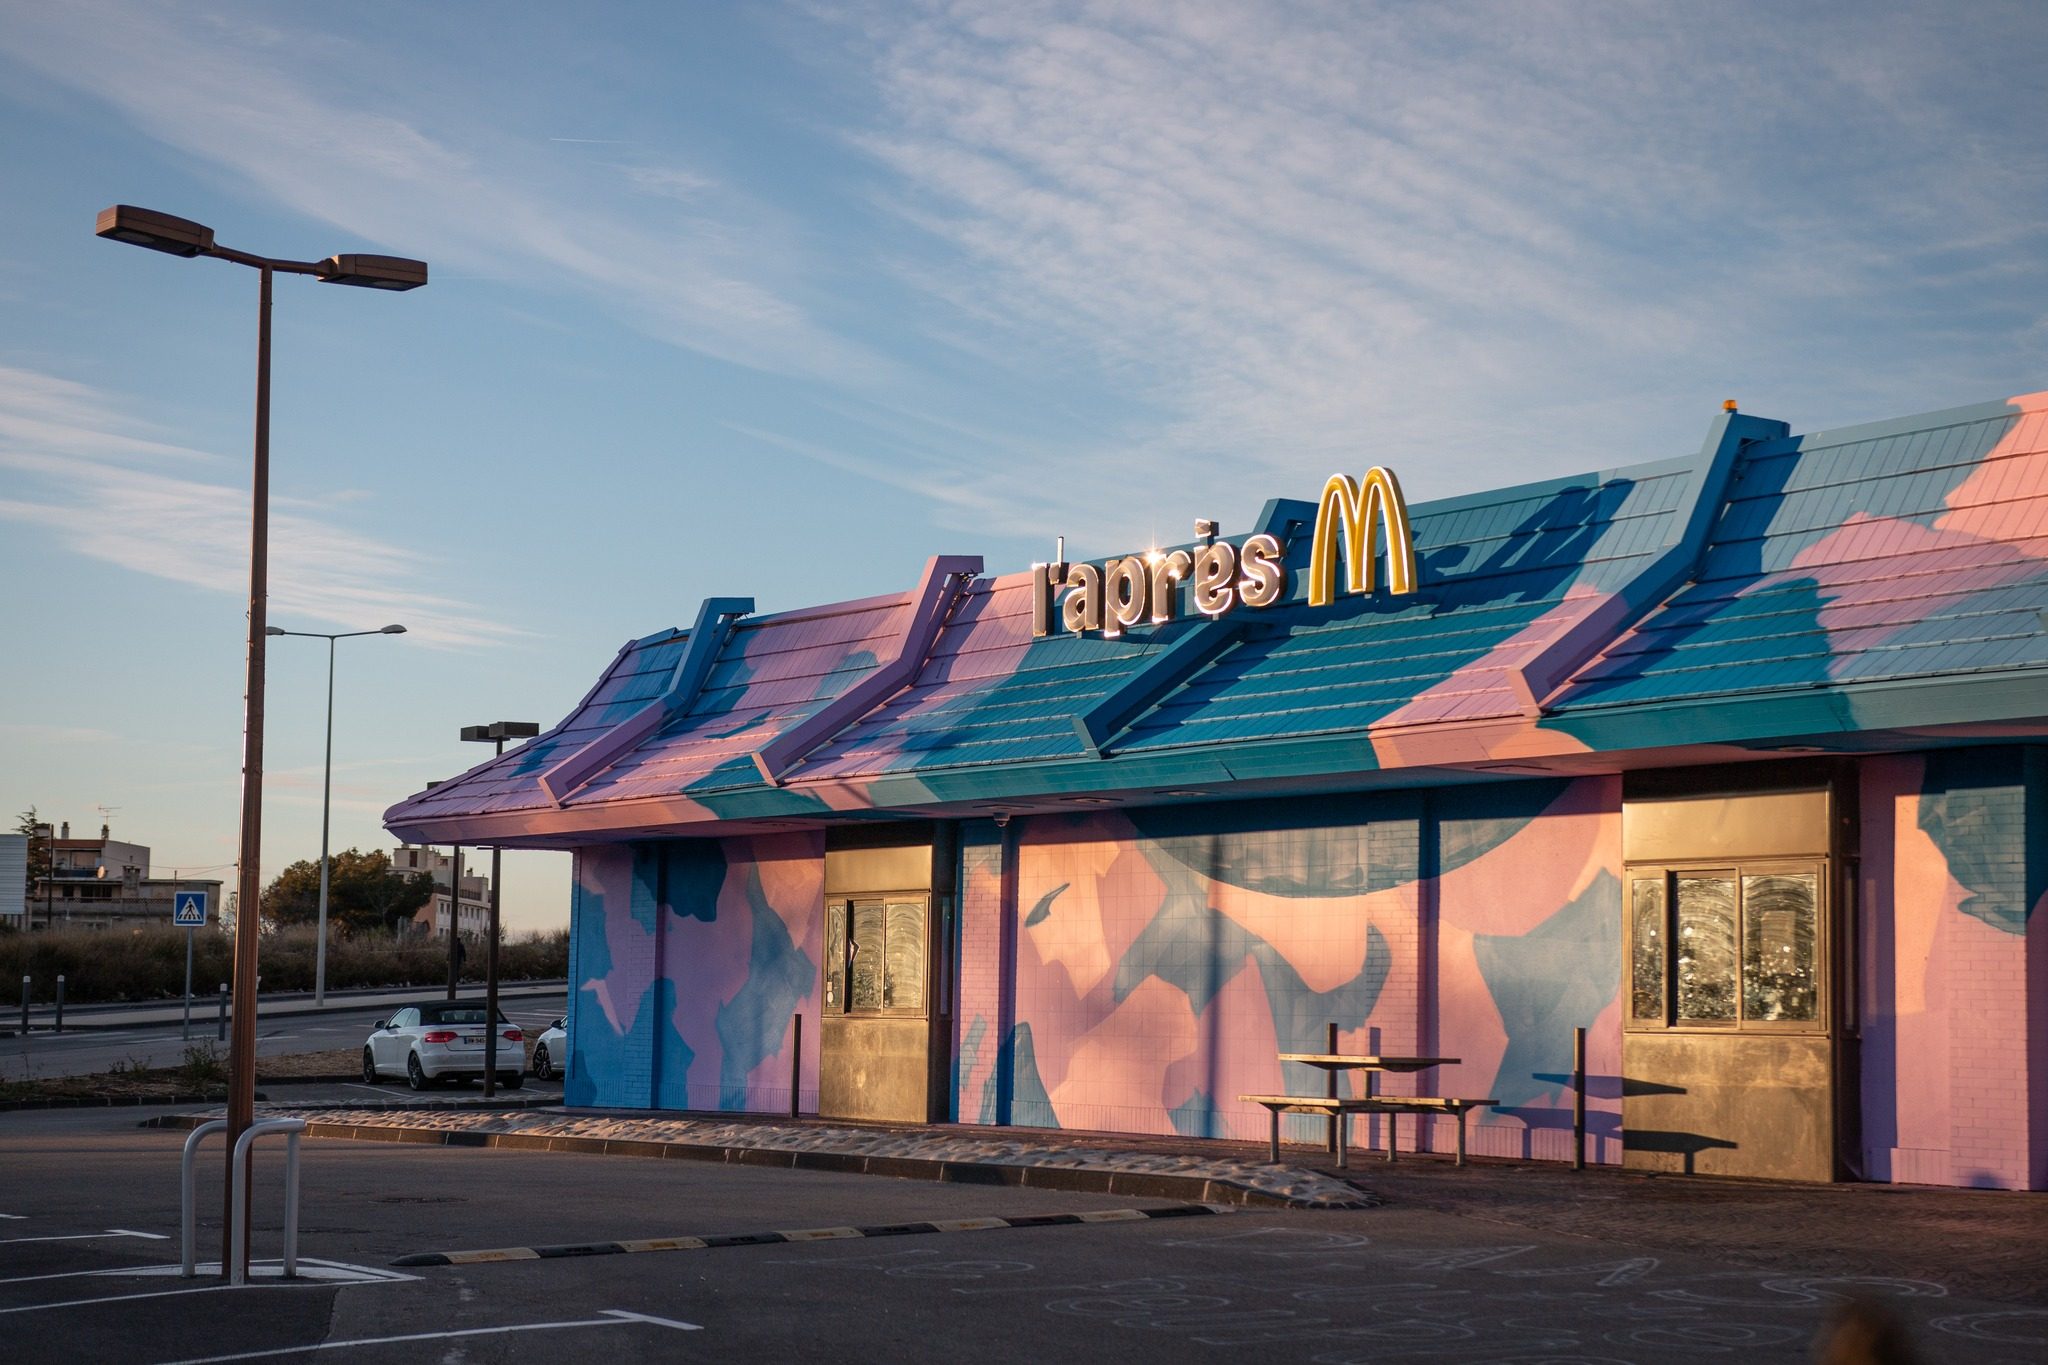 Marseille has an exciting food scene, from a fine-dining restaurant inside a tough prison giving inmates a chance at rehabilitation, to a converted McDonald’s drive-through (above) selling high-end burgers. Photo: Facebook / @LApresM